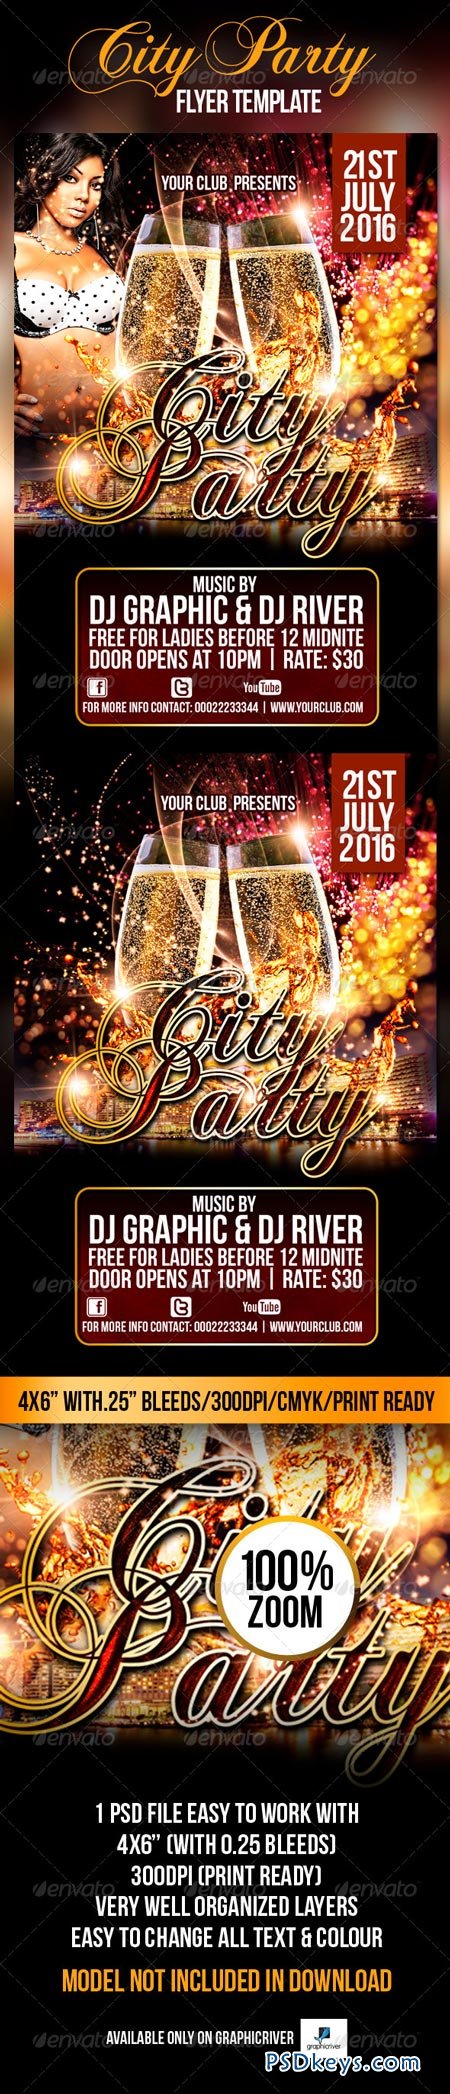 City Party Flyer Template 4344423